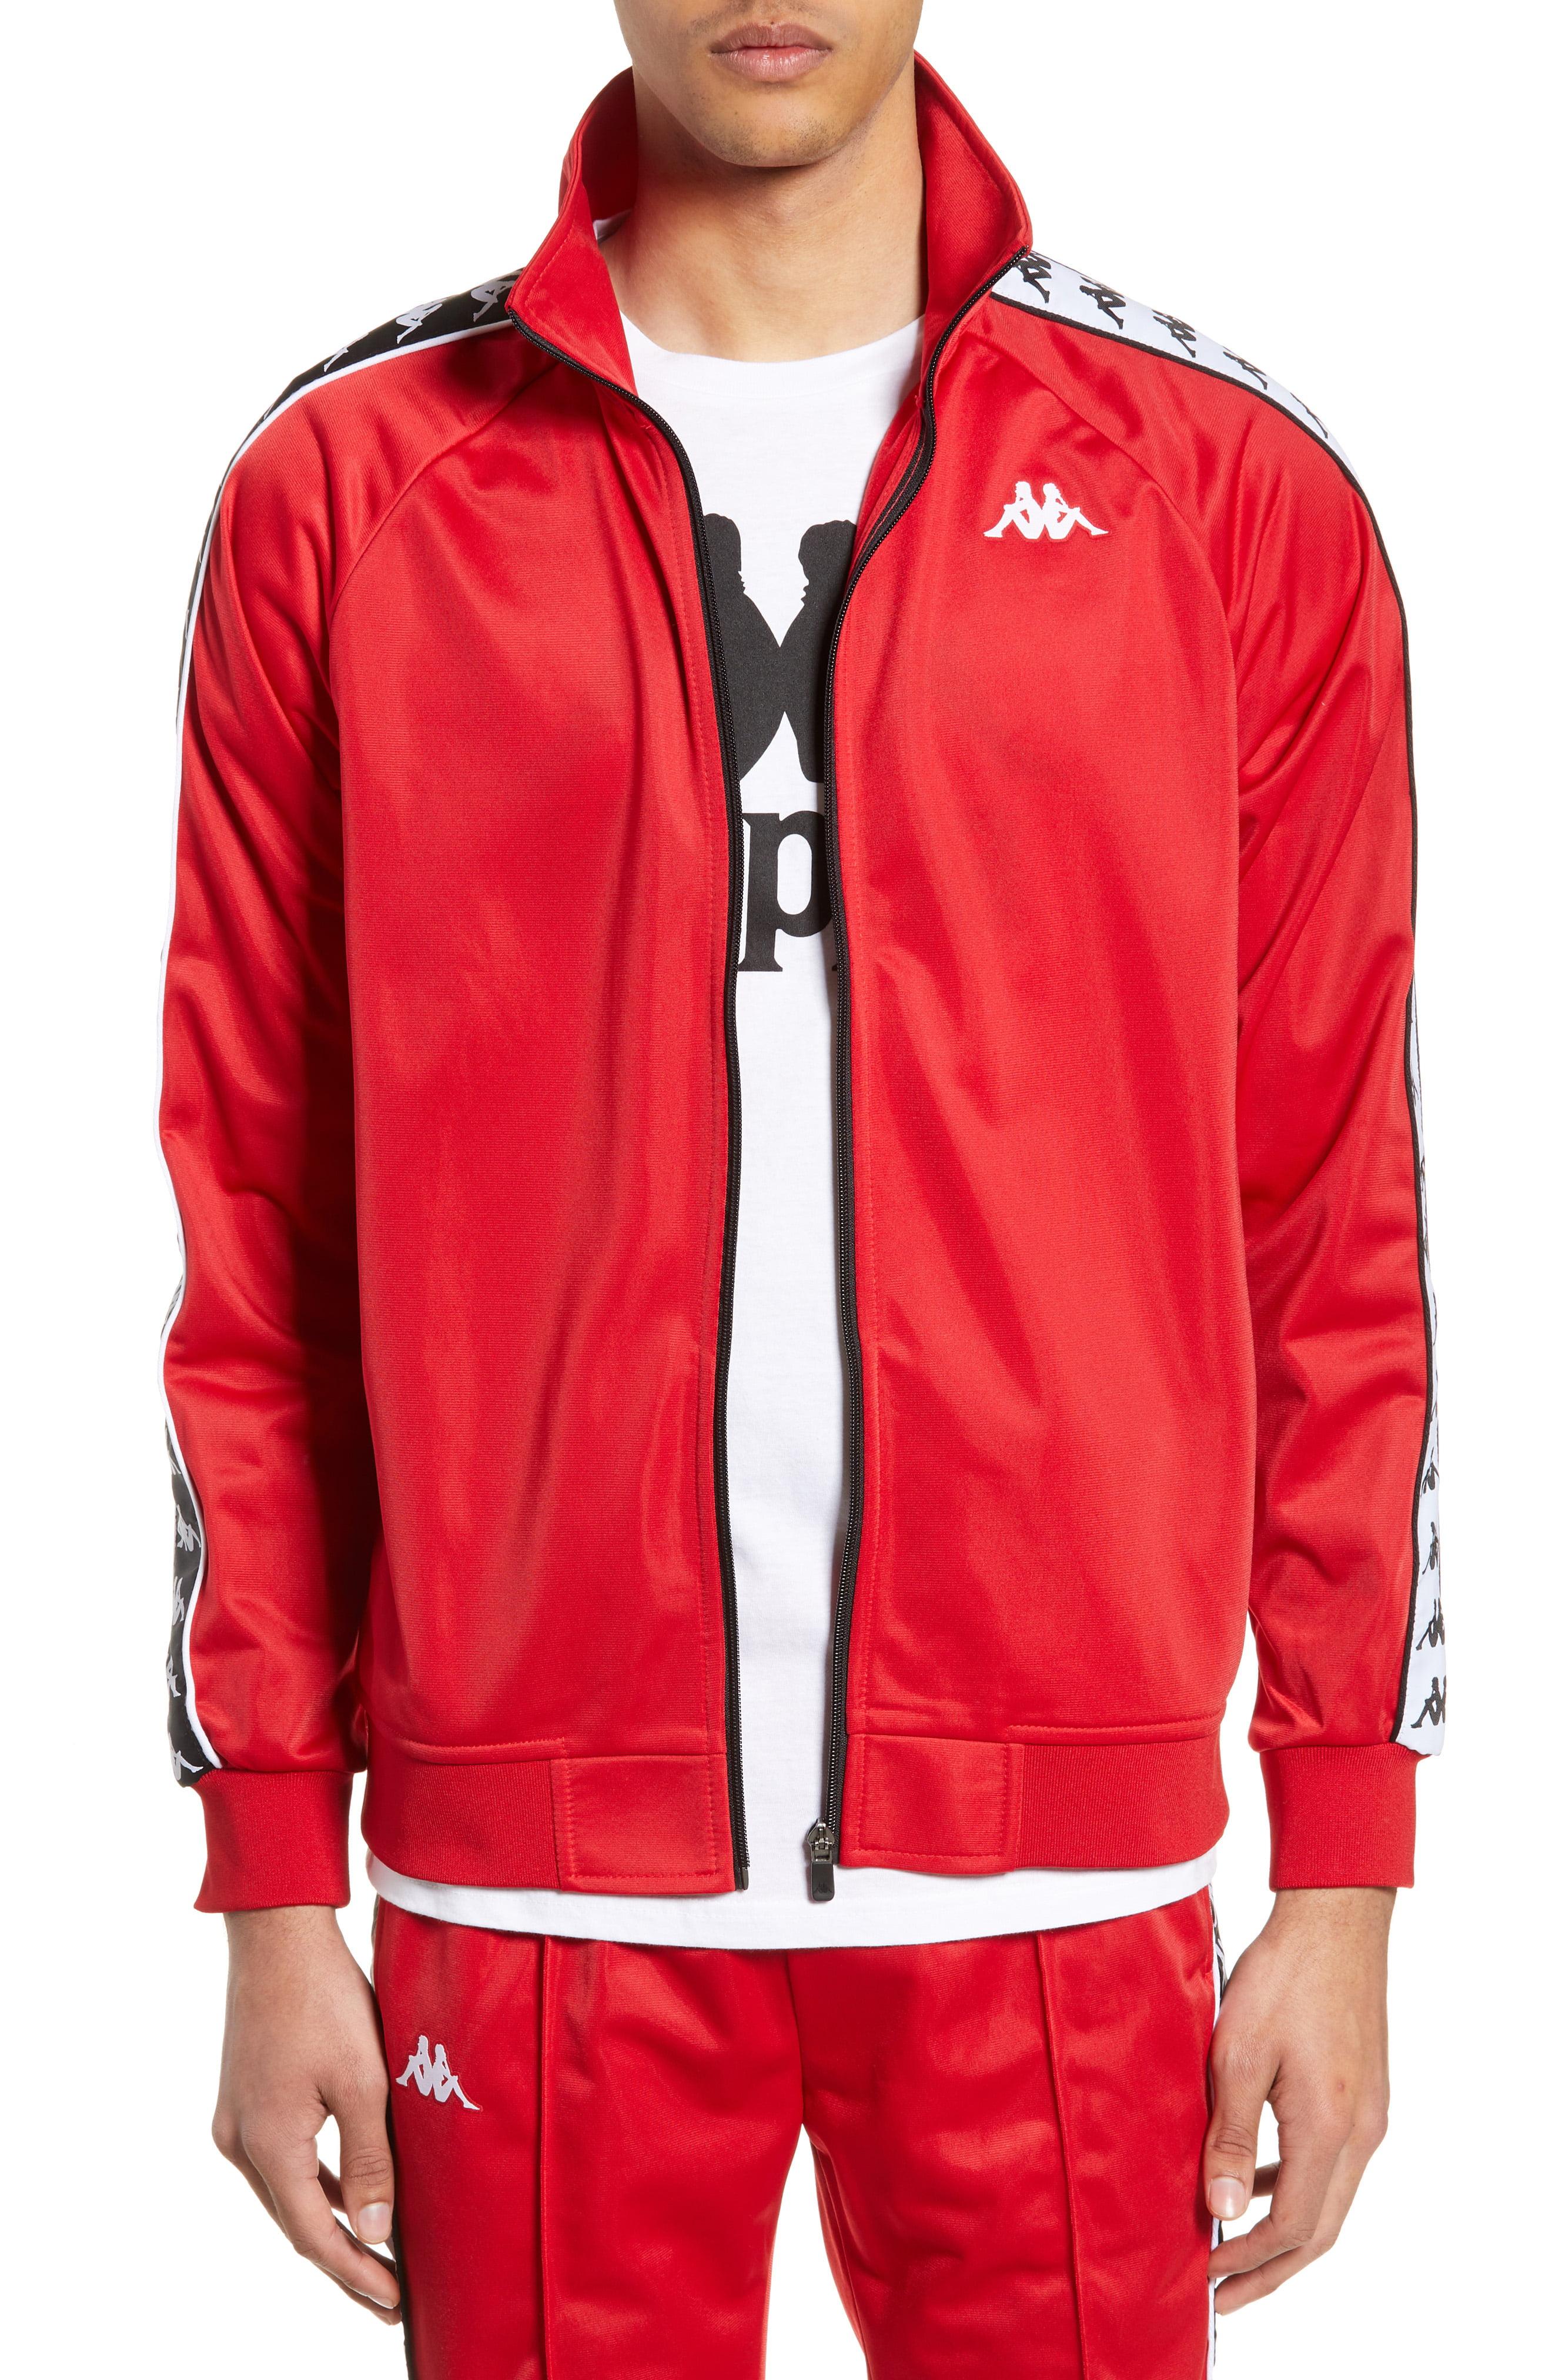 Kappa 222 Banda Anniston Track Jacket in Red for Men - Lyst